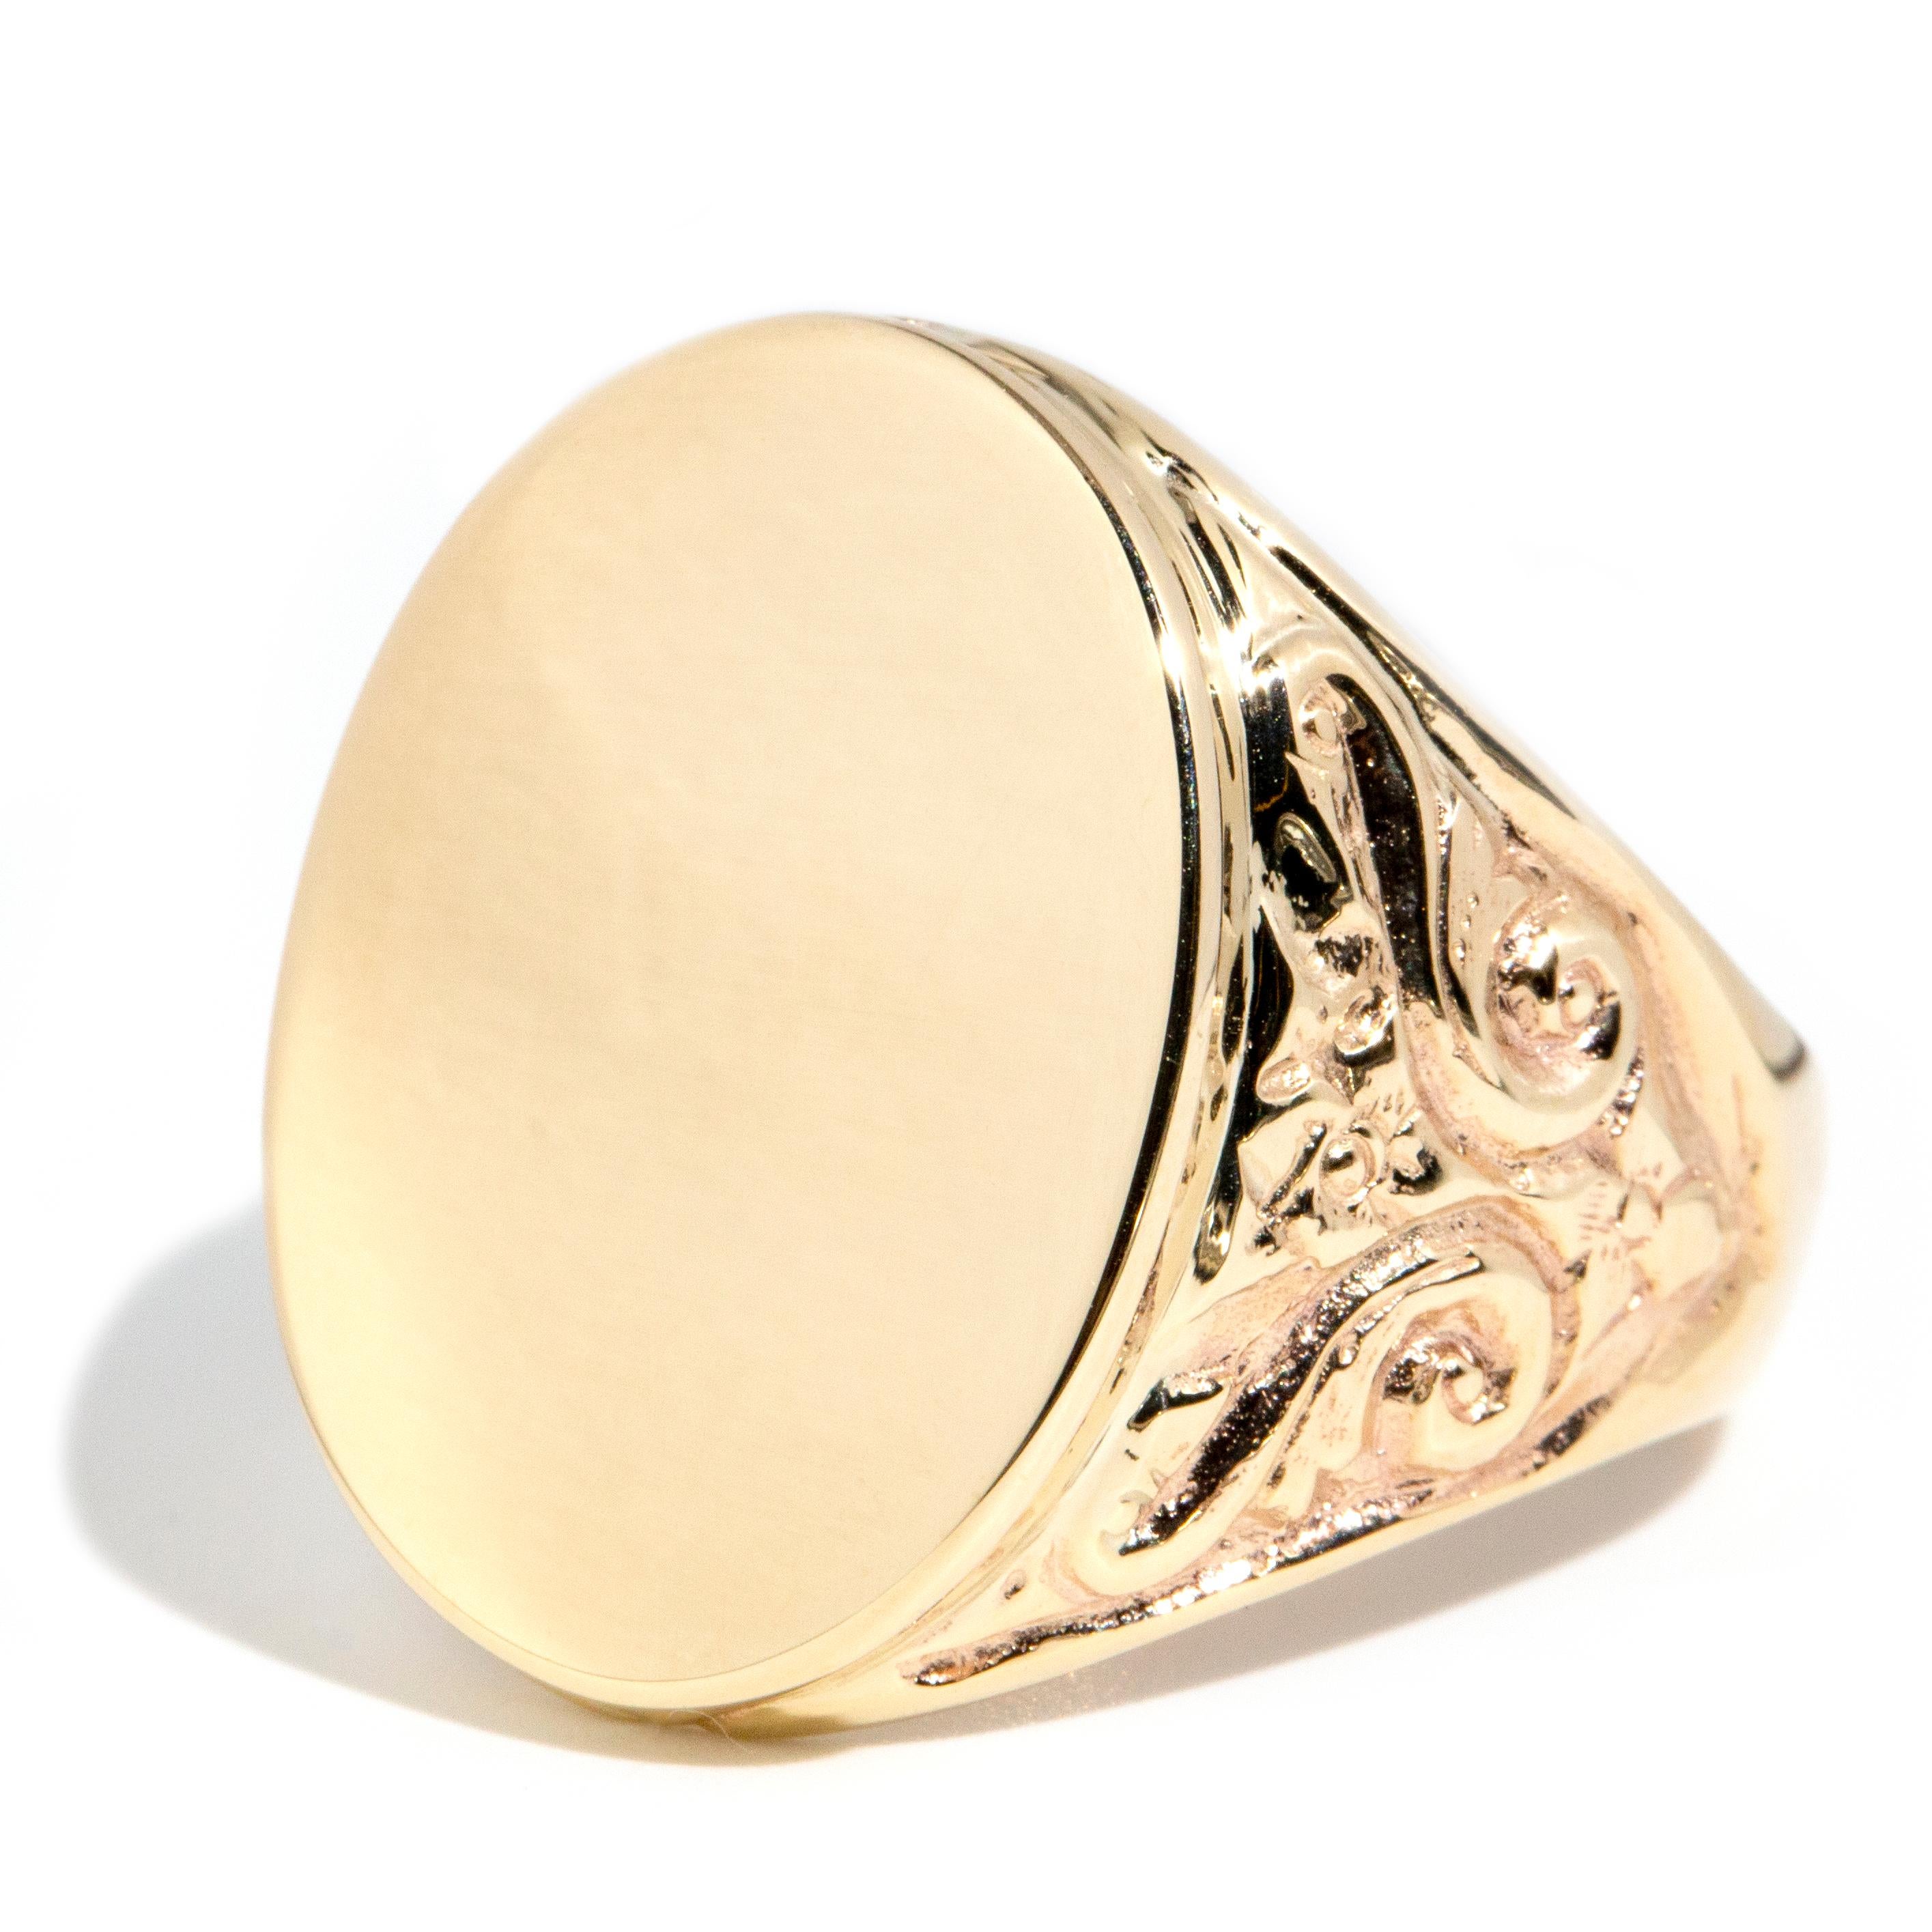 Modern Vintage circa 1970s 9 Carat Yellow Gold Domed Oval Patterned Unisex Signet Ring For Sale